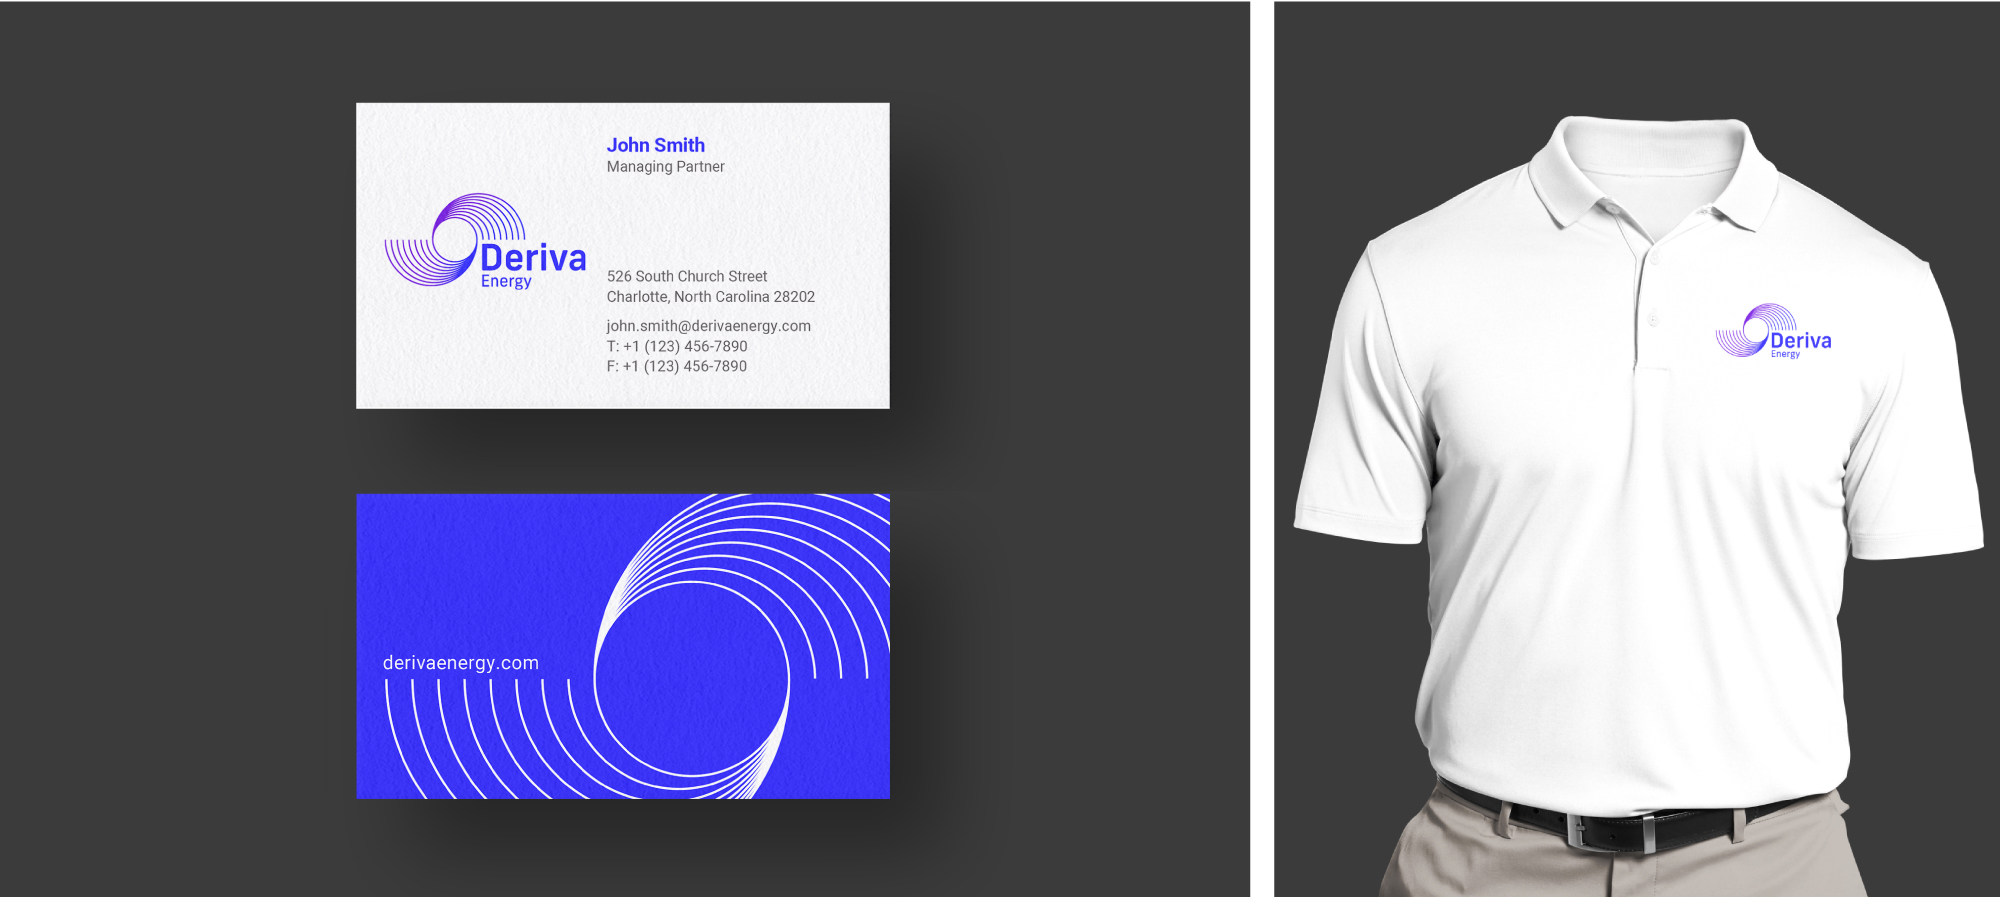 mockup of business card and shirt with deriva logo